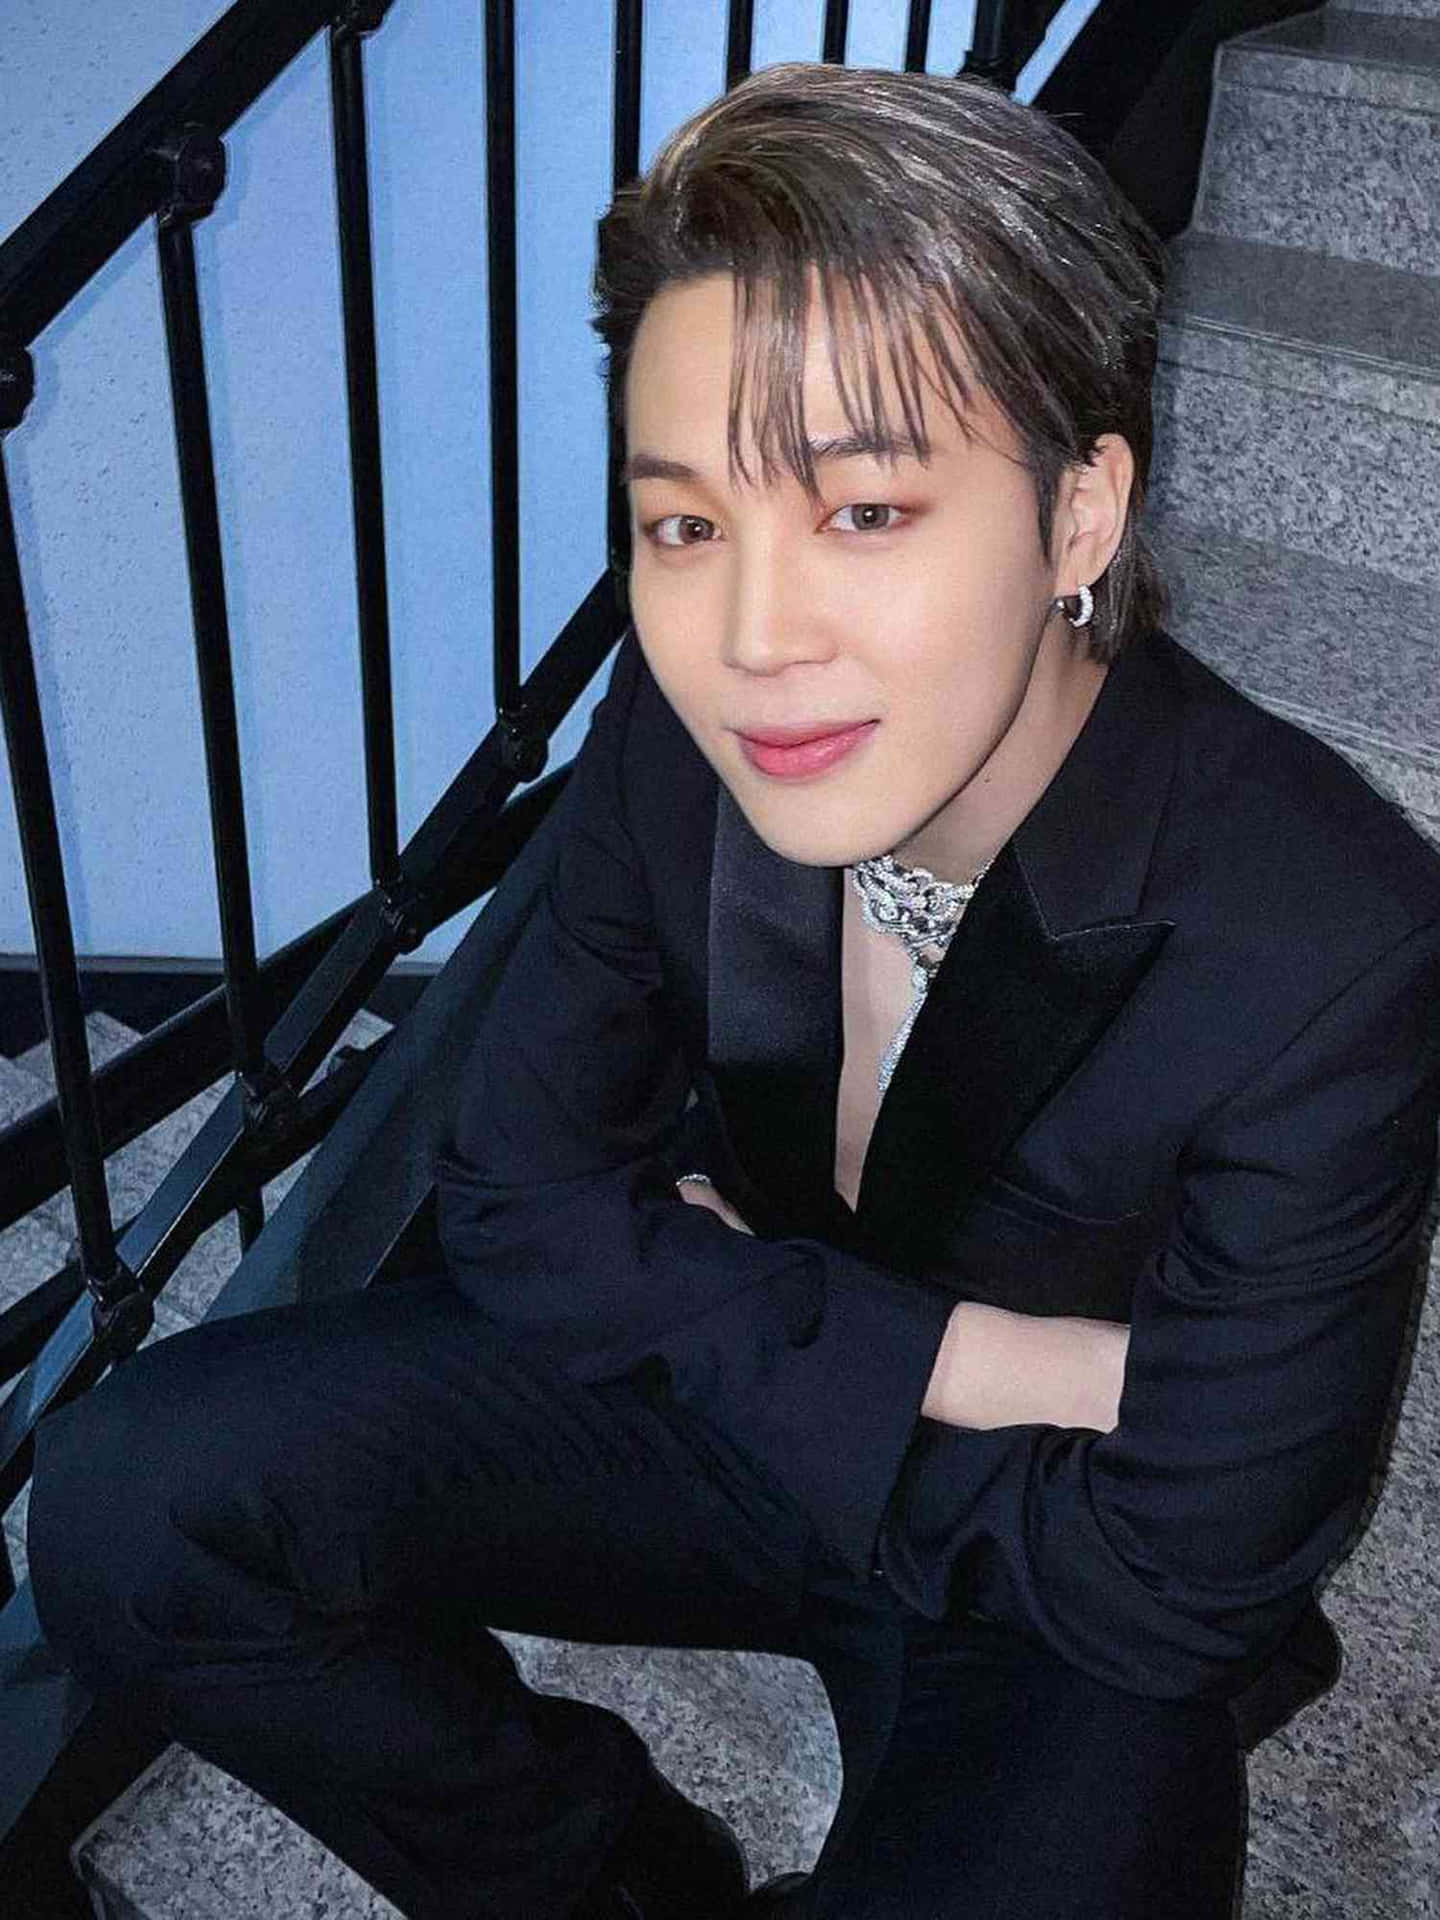 Jimin of BTS rocks his iconic style